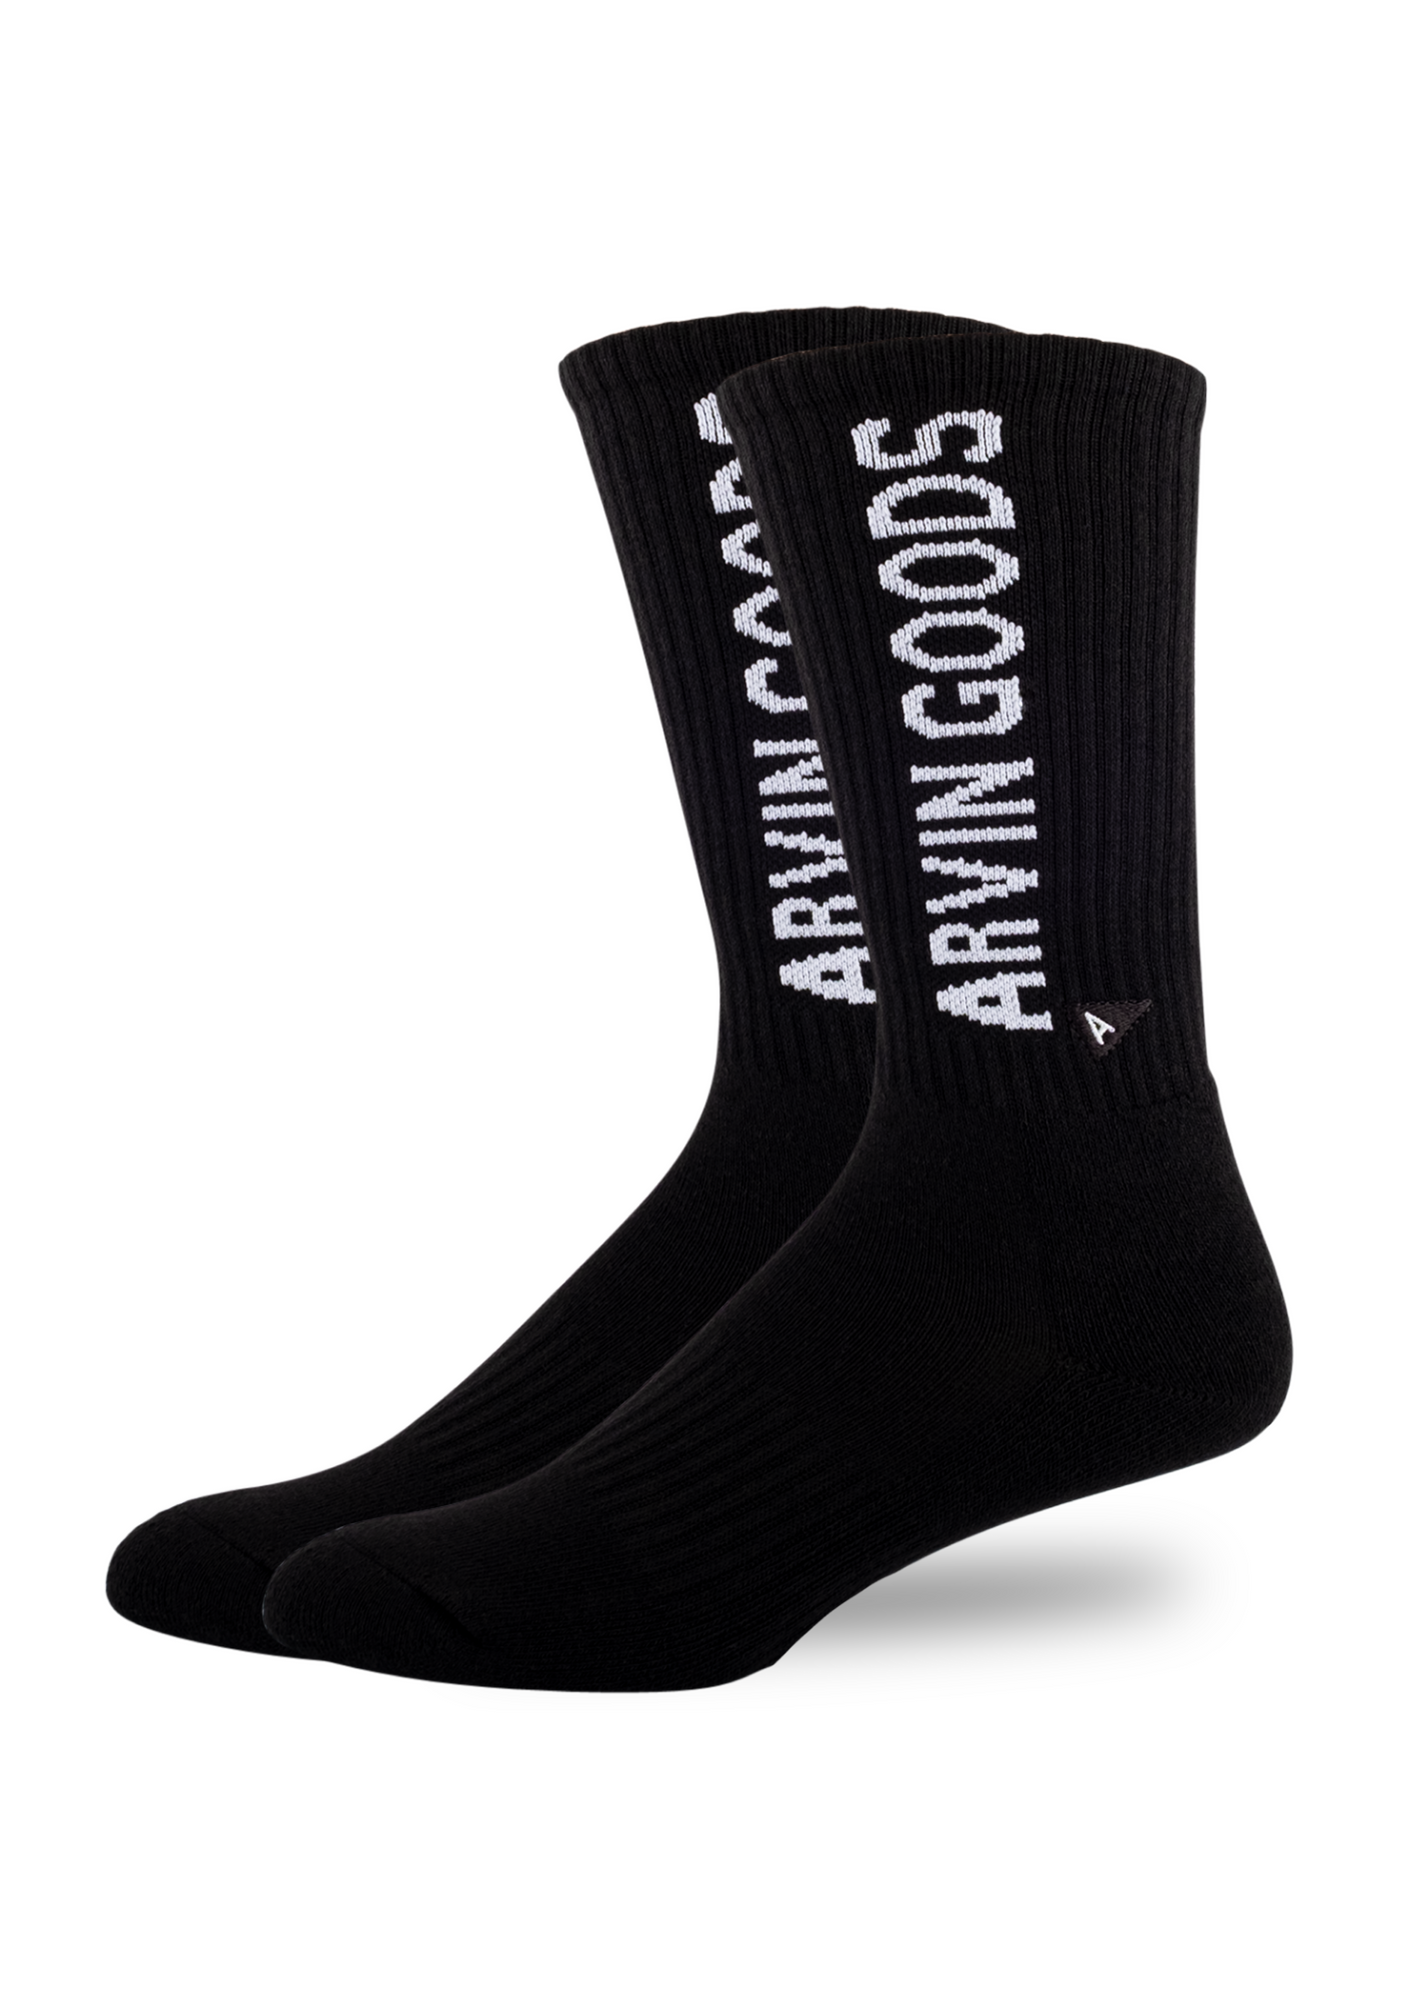 Arvin Goods Tall Crew Sock Black with Arvin Goods Lettering in White